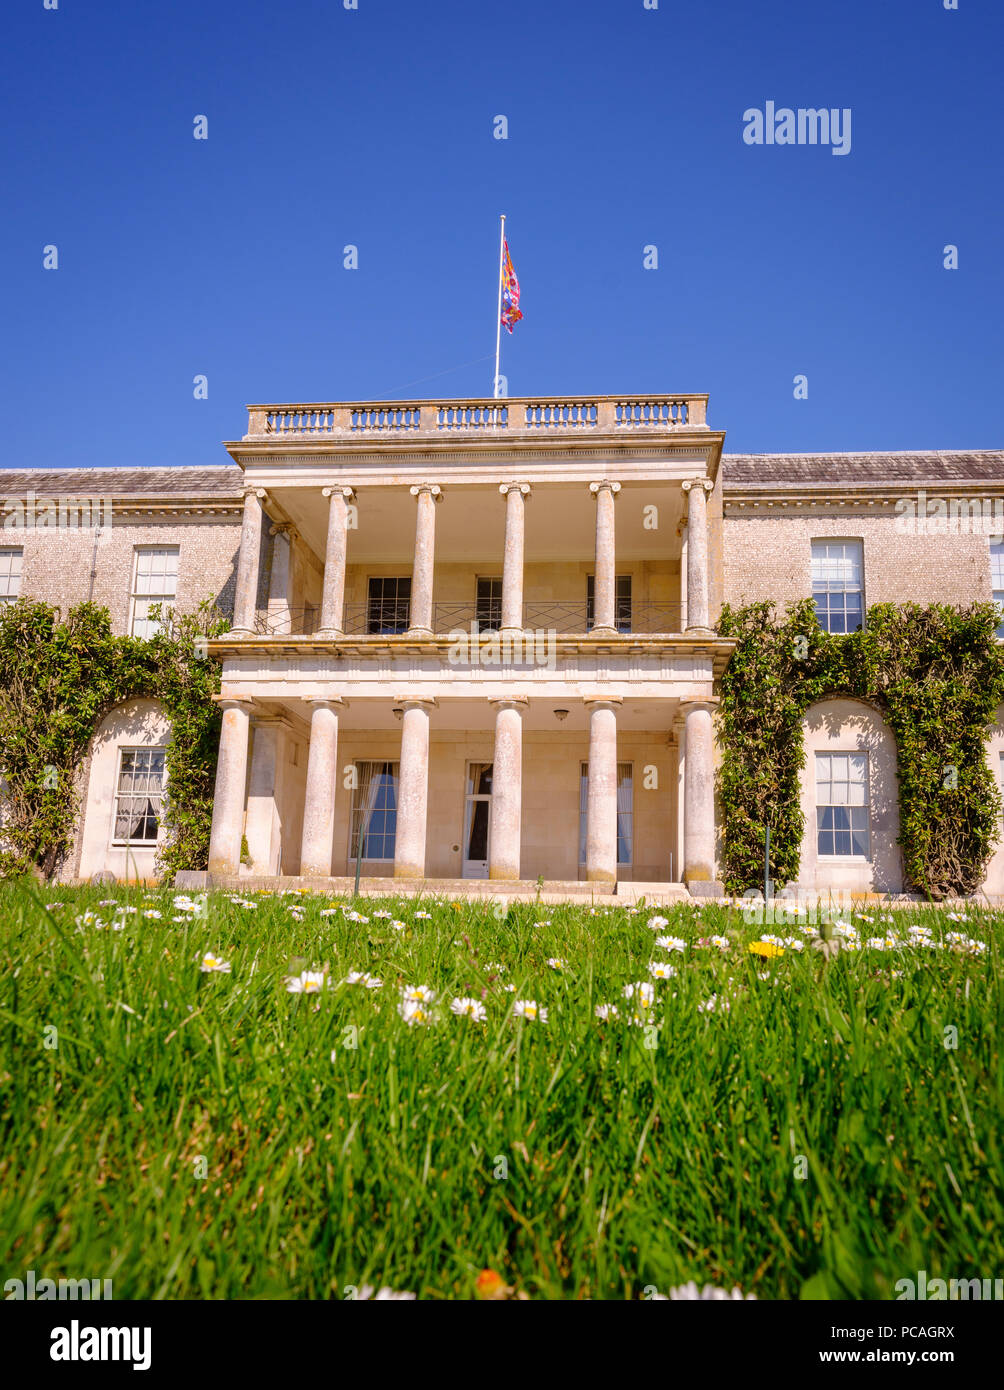 Goodwood House, a Goodwood station wagon, West Sussex Regno Unito. Foto Stock